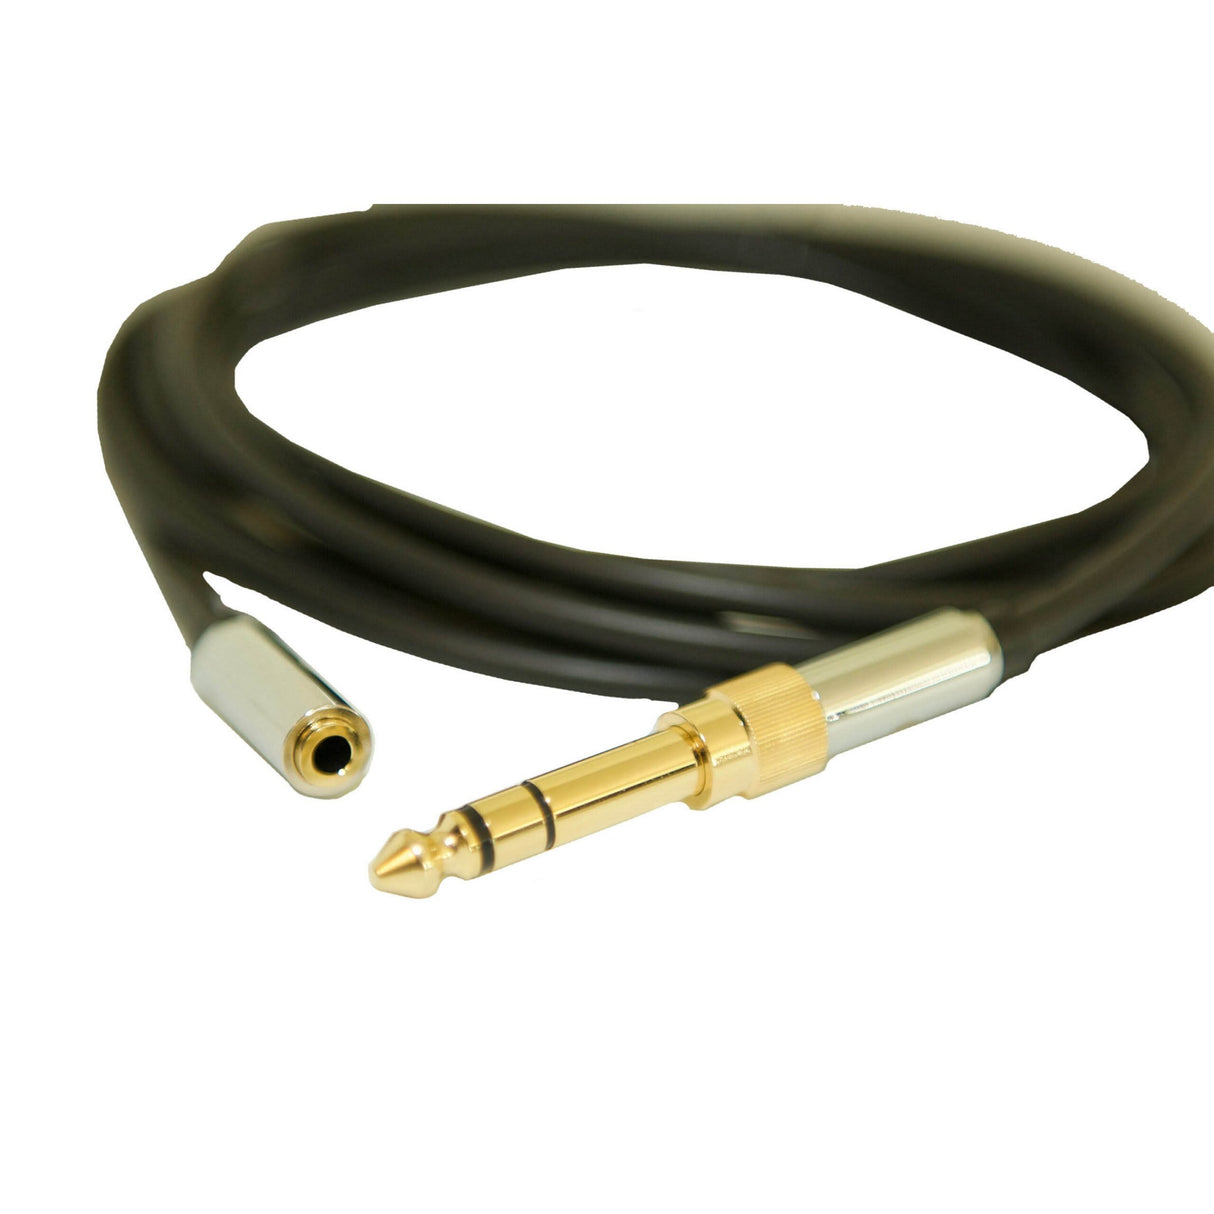 Direct Sound CX96C Premium 96 Inch Cable with 3.5mm Stereo Plug